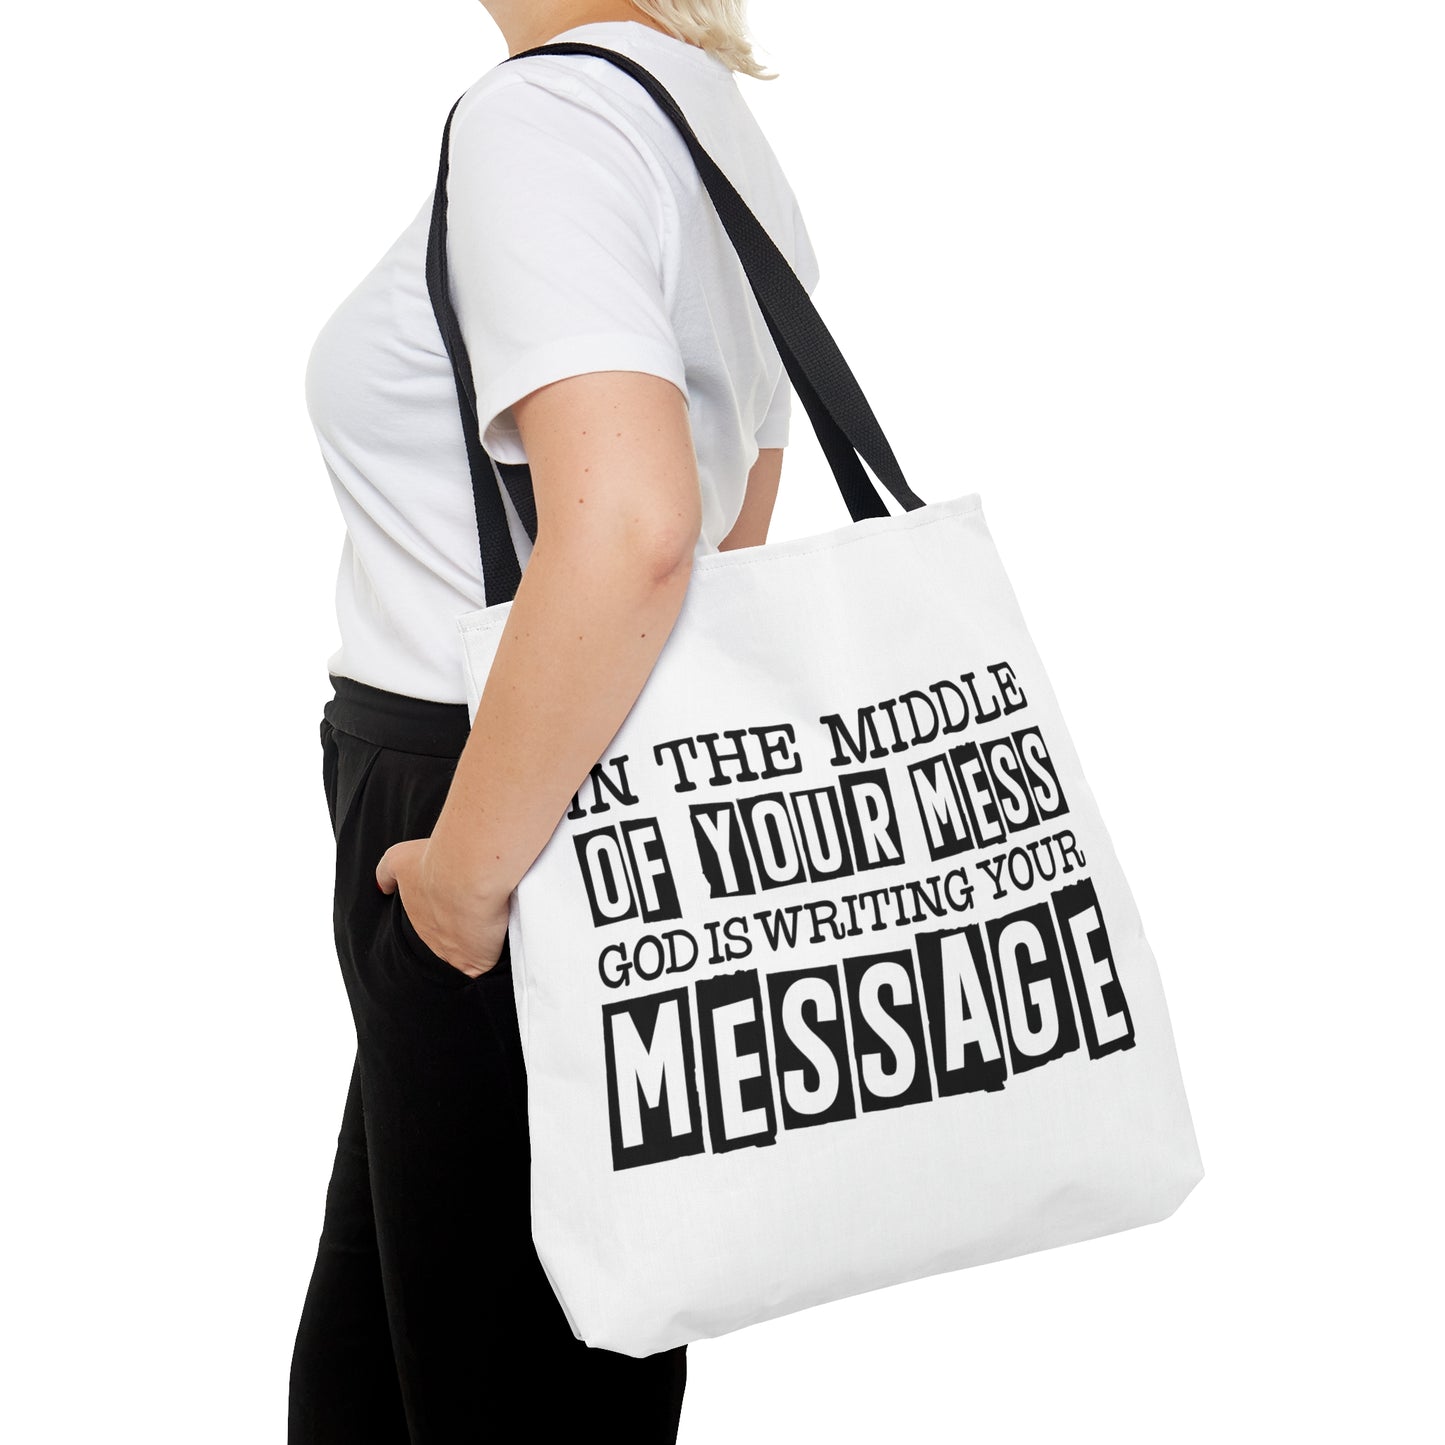 In The Middle Of Your Mess God Is Writing Your Message Christian Tote Bag Printify